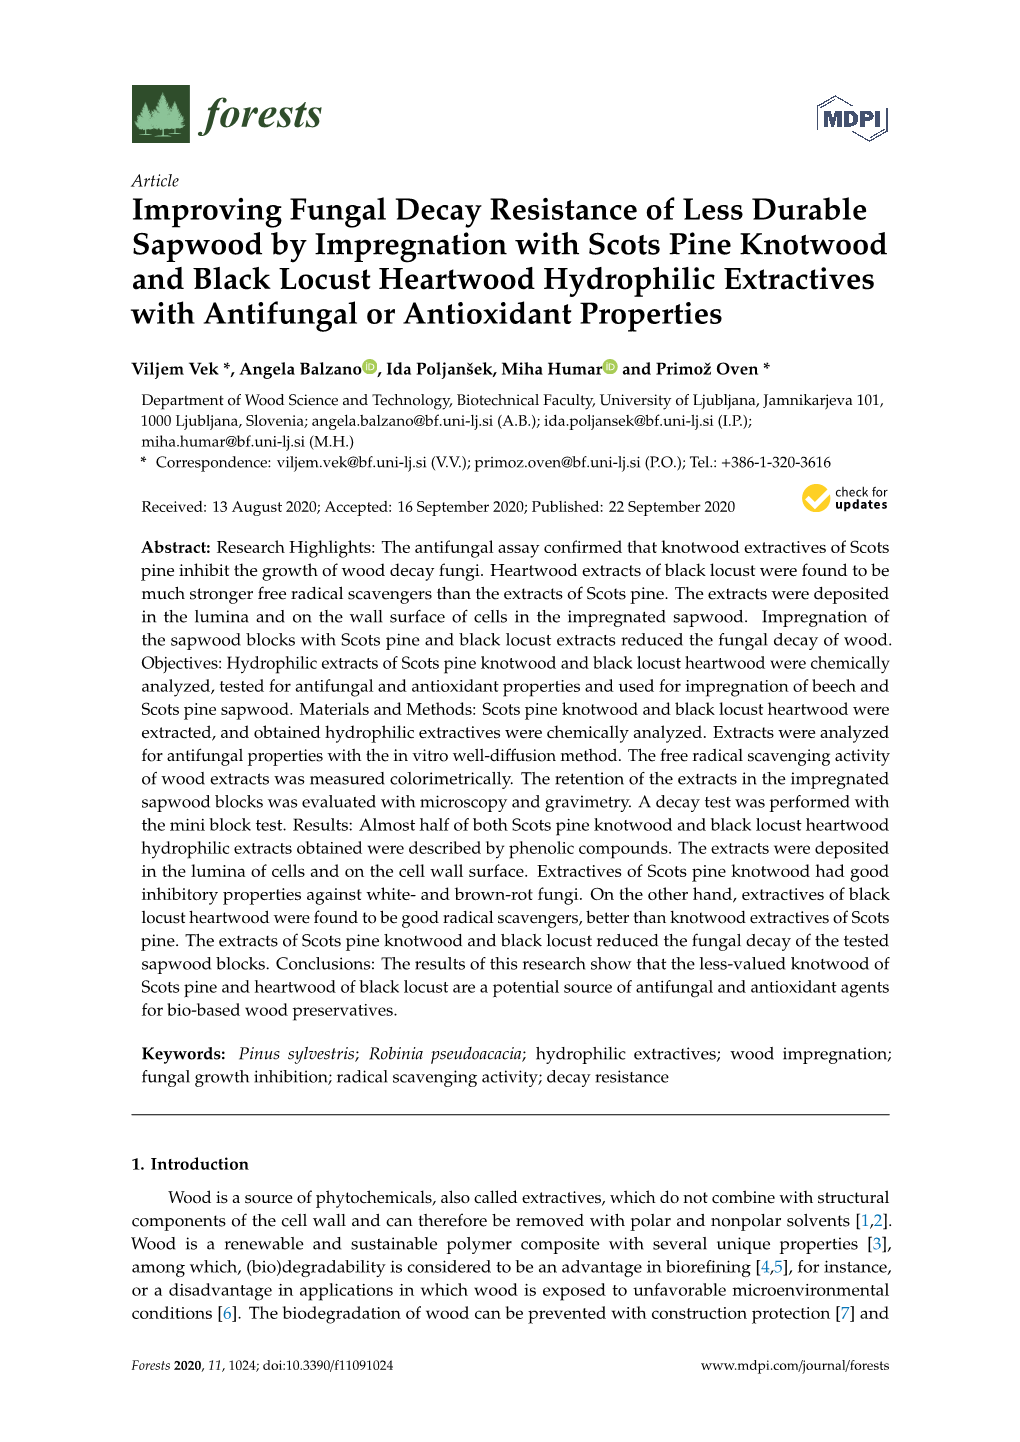 Improving Fungal Decay Resistance of Less Durable Sapwood By